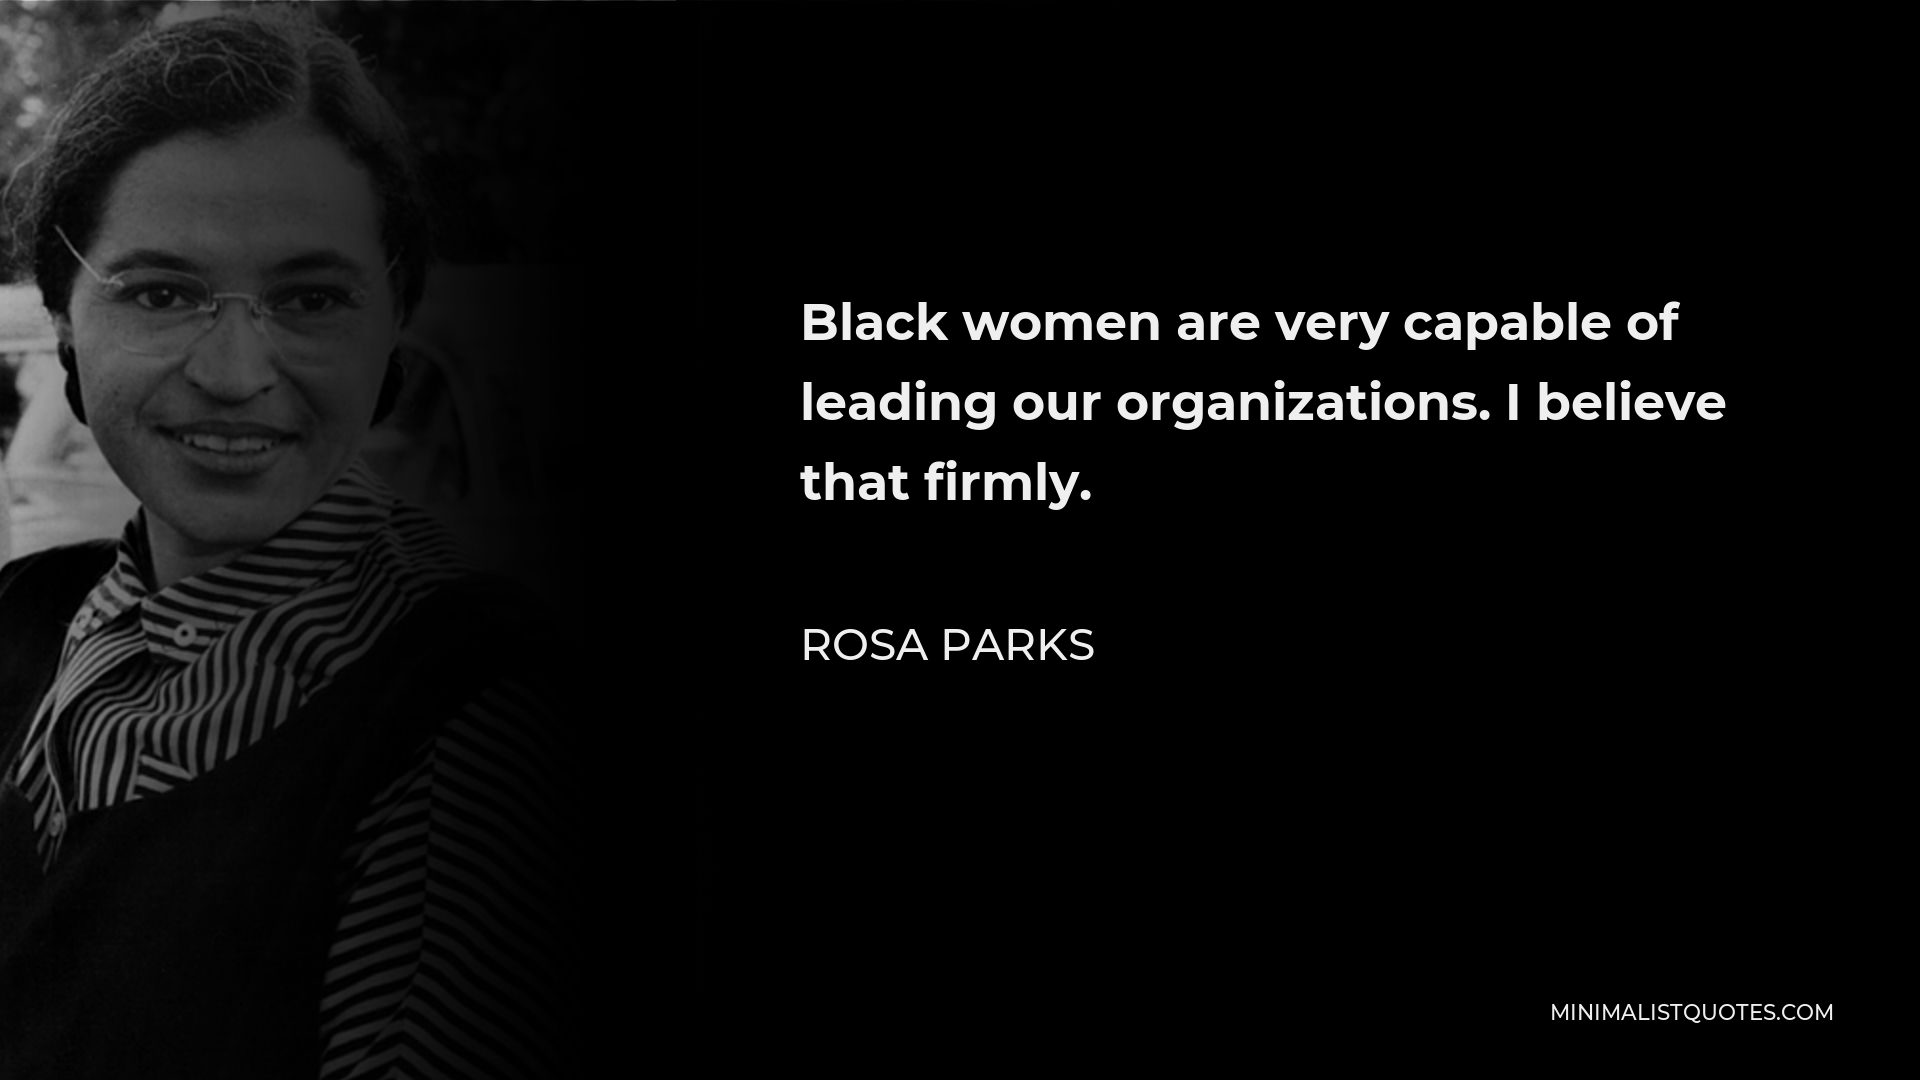 Rosa Parks Quote - Black women are very capable of leading our organizations. I believe that firmly.